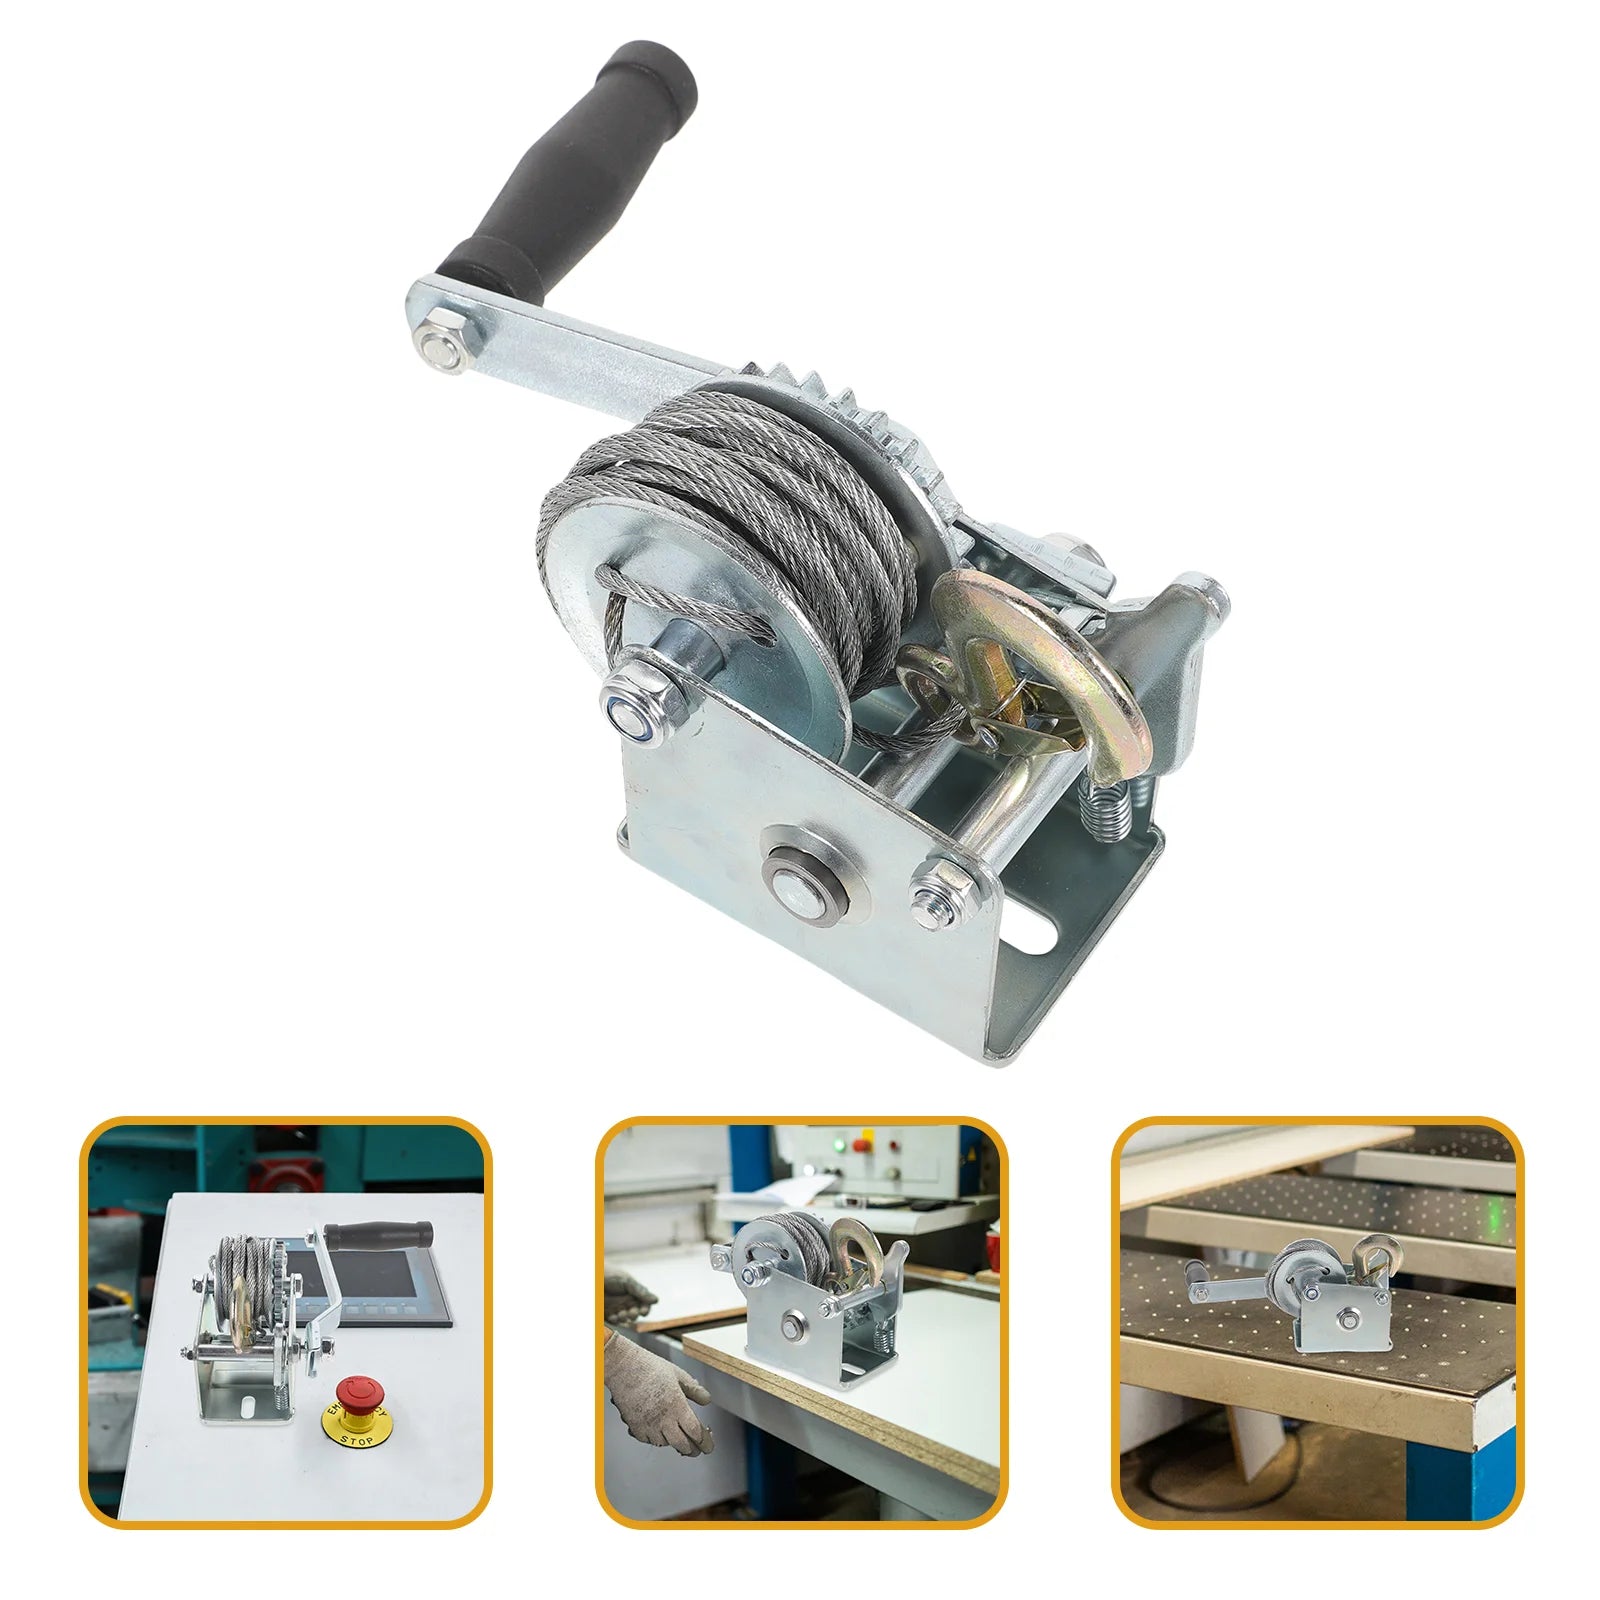 Hand Winch 600-3000 Pounds Manual Winch Wire Rope Traction Hoisting Winch Complete Specifications Winches Squeaks